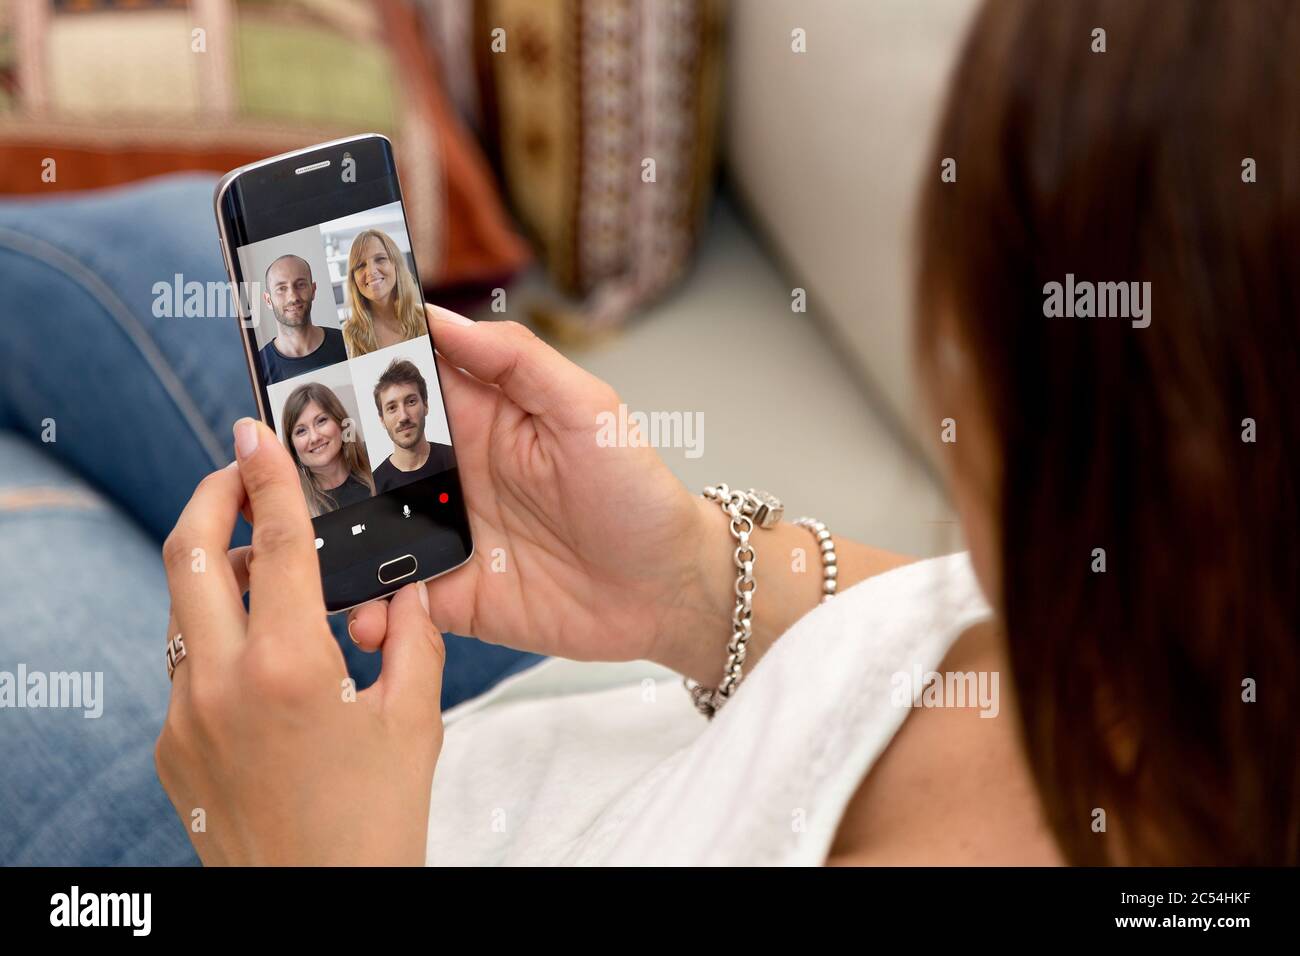 Video conference with a group of people. Young woman having a video chat with many people on her mobile phone. Stock Photo